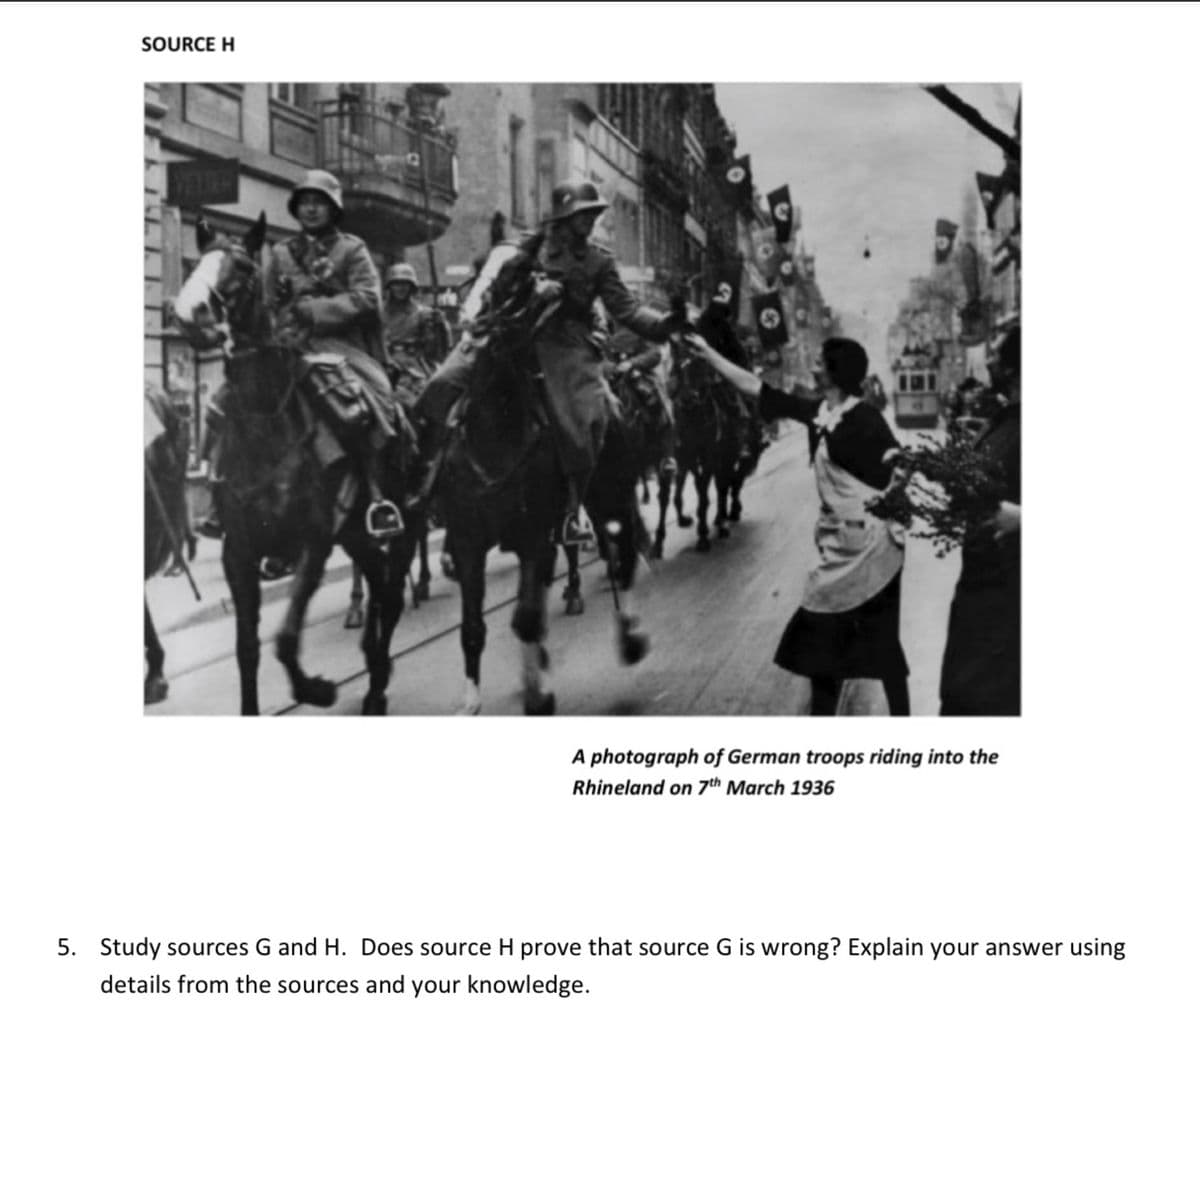 SOURCE H
T
A photograph of German troops riding into the
Rhineland on 7th March 1936
5. Study sources G and H. Does source H prove that source G is wrong? Explain your answer using
details from the sources and your knowledge.